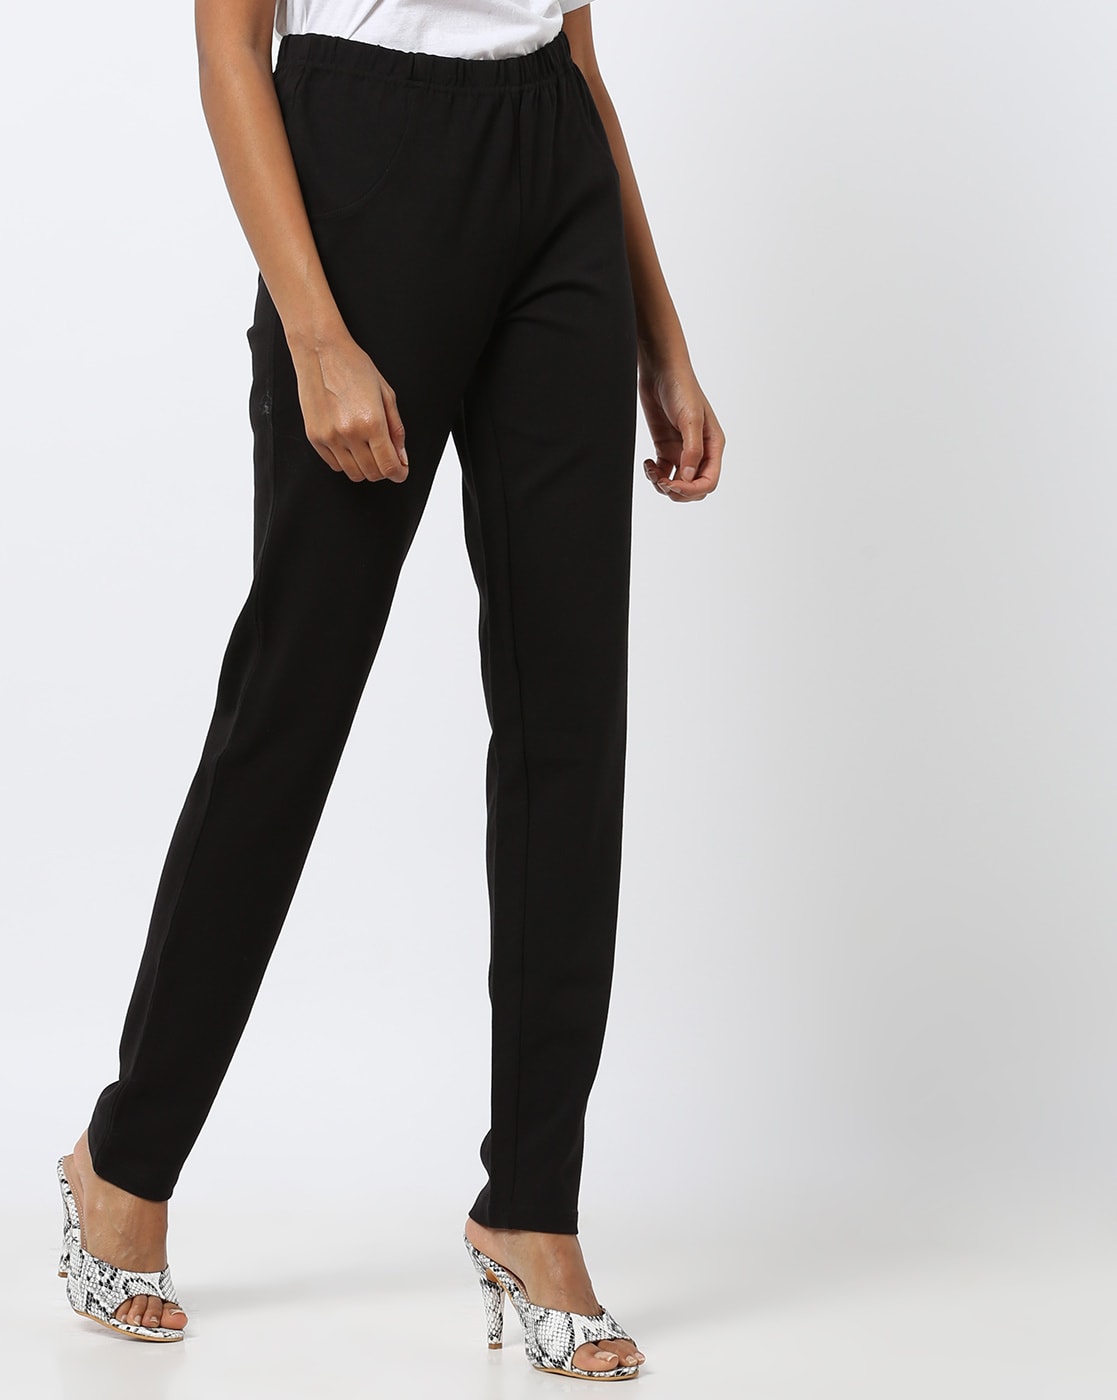 Buy Black Trousers and Collection Online  Gocolors